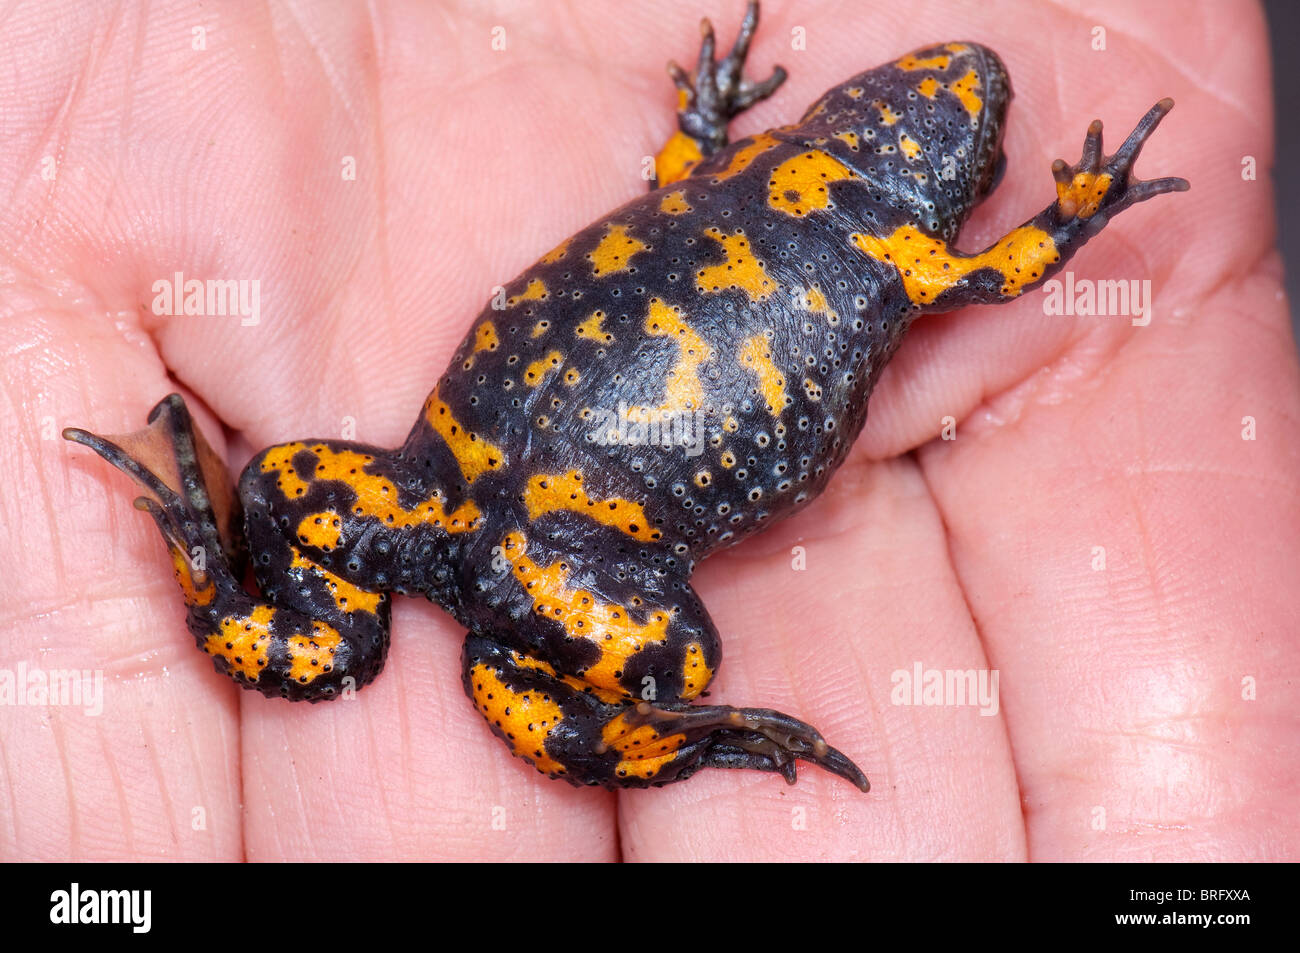 European Fire-bellied Toad (Bombina bombina) lying on its back in a hand to show warning colors Stock Photo